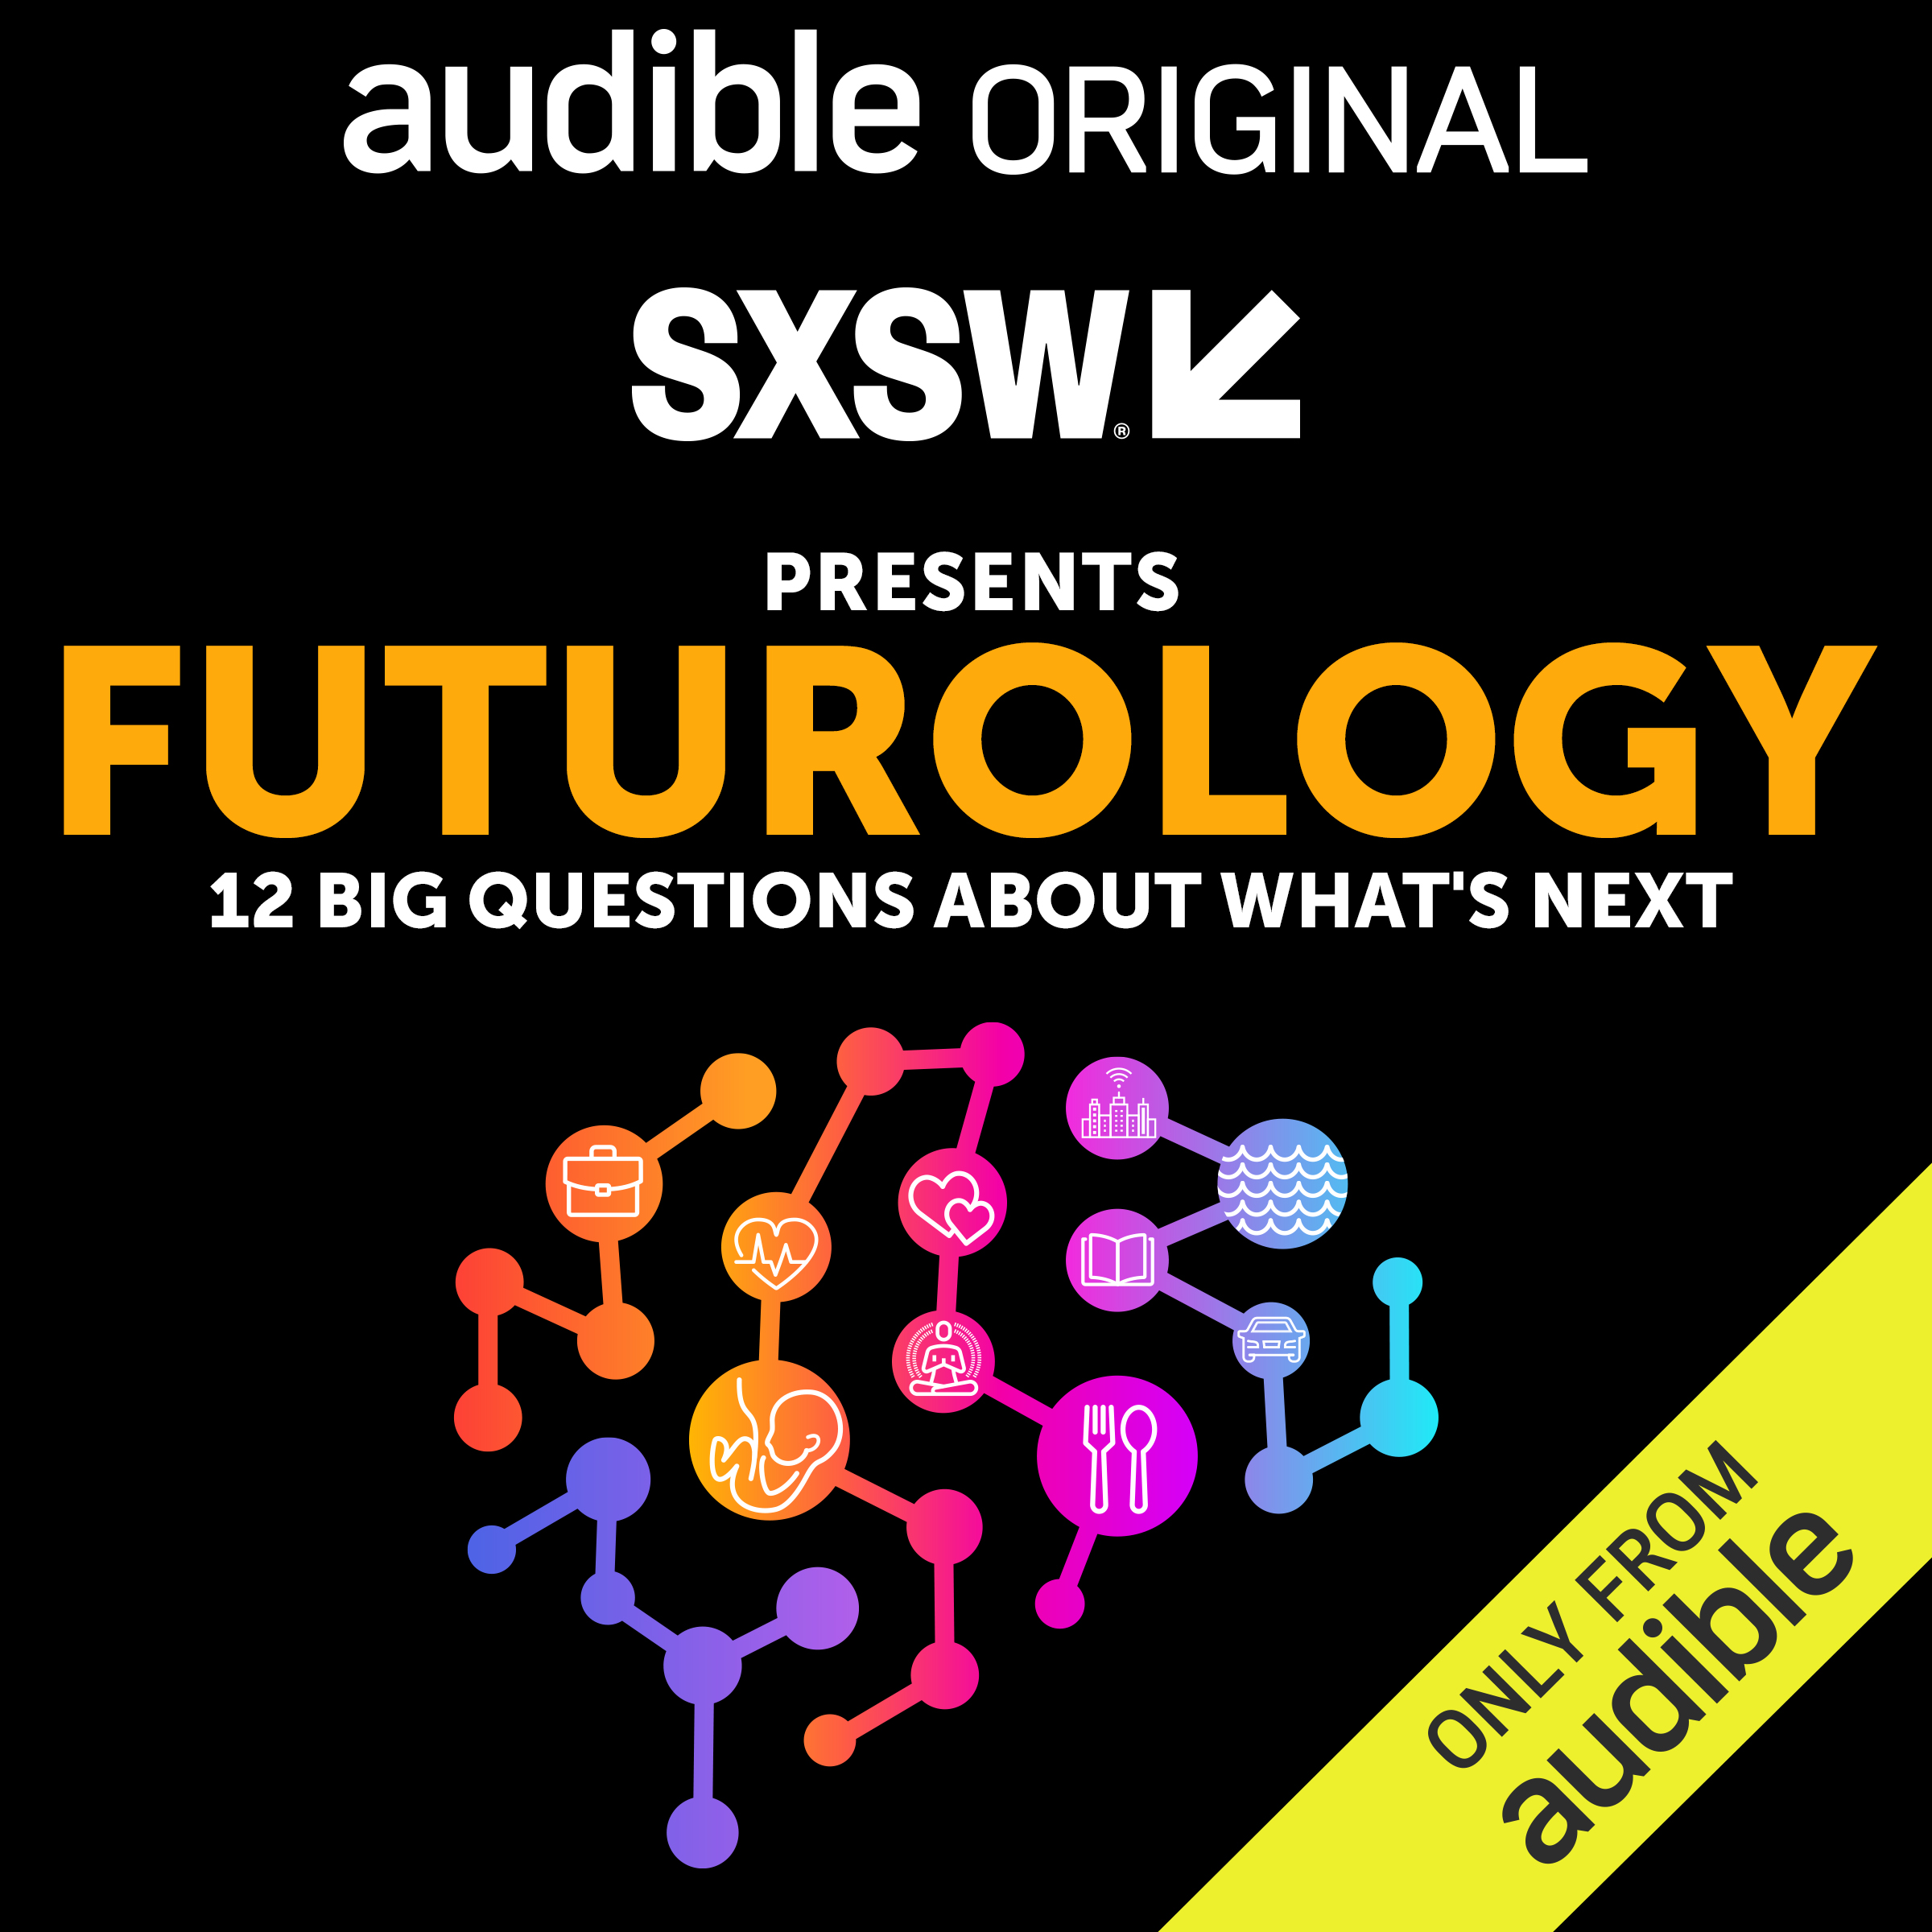 Futurology - An Audible original podcast presented by SXSW